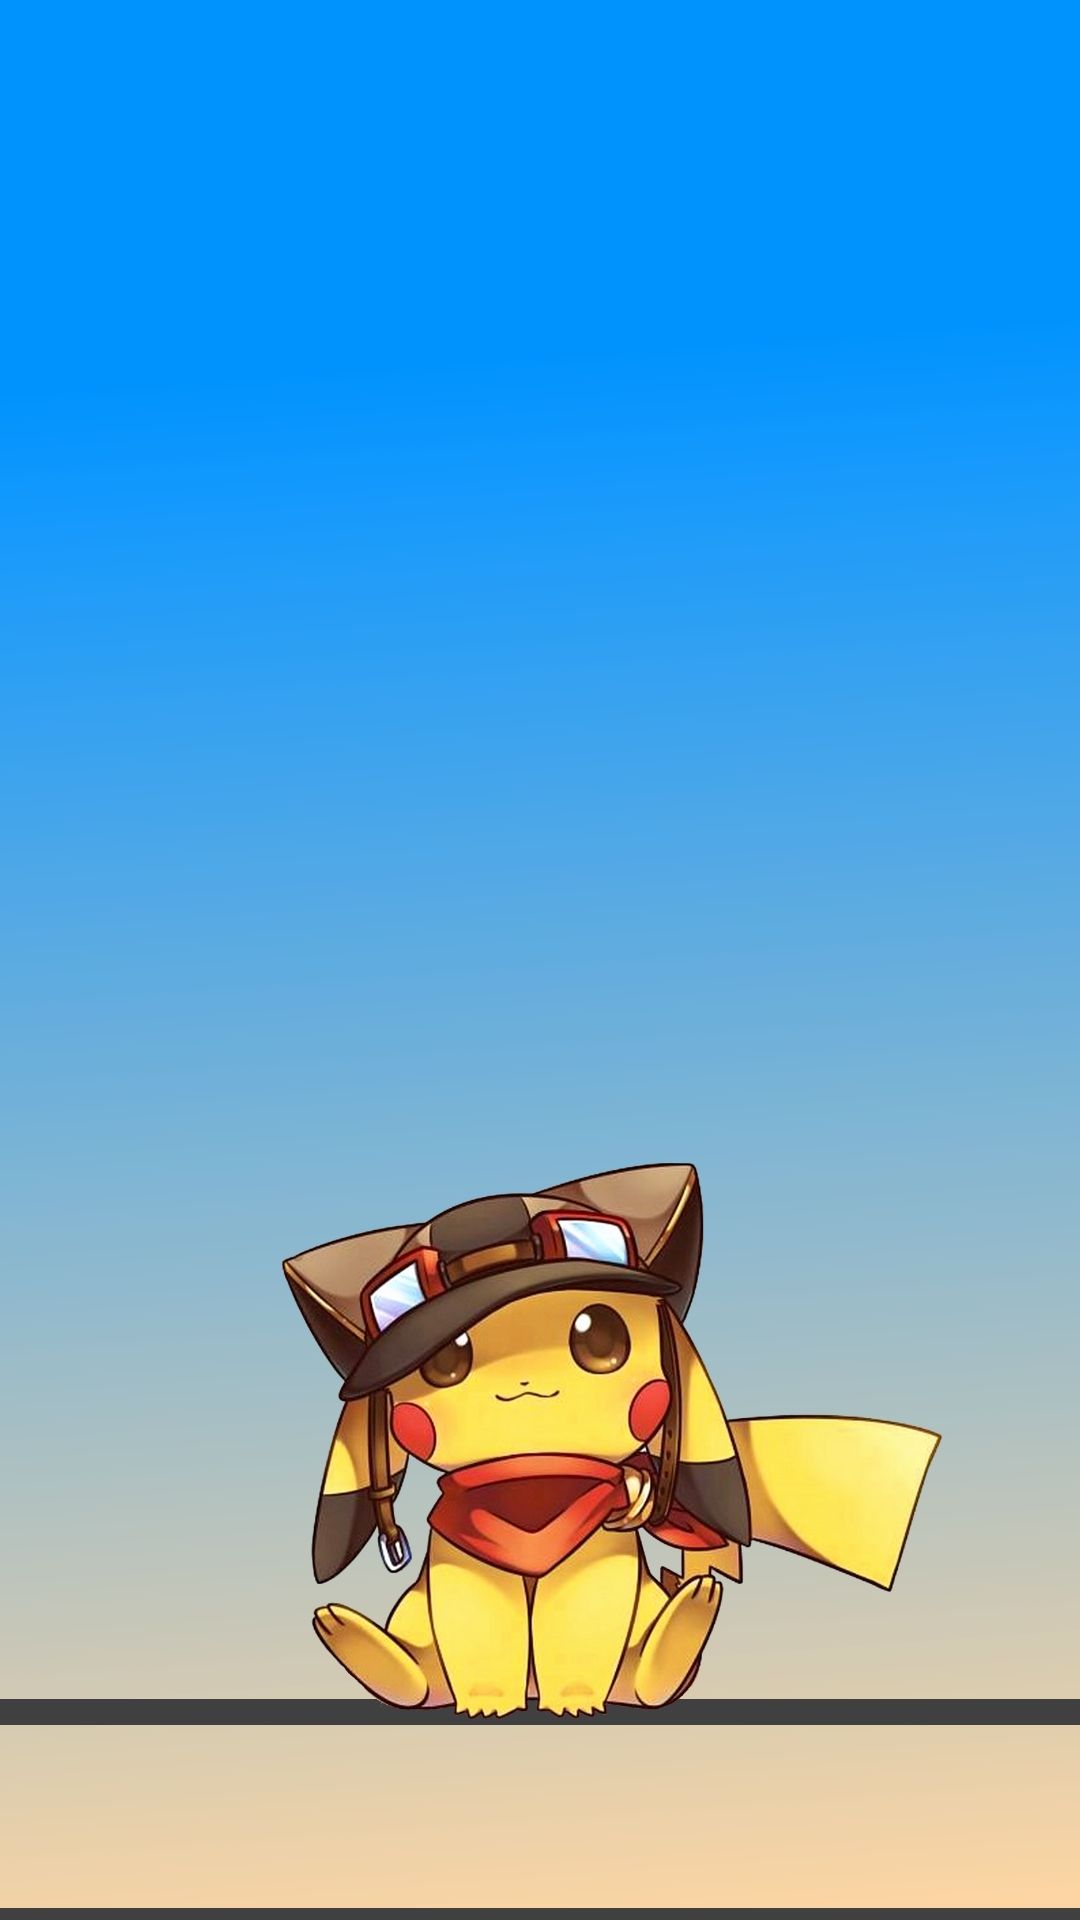 Free download Tag iPhone Wallpapers Pikachu likable Latest Updates Pictures  640x960 for your Desktop Mobile  Tablet  Explore 50 Pikachu iPhone  Wallpaper  Pokemon Pikachu Wallpapers Pikachu Wallpaper Pokemon Wallpaper  Pikachu